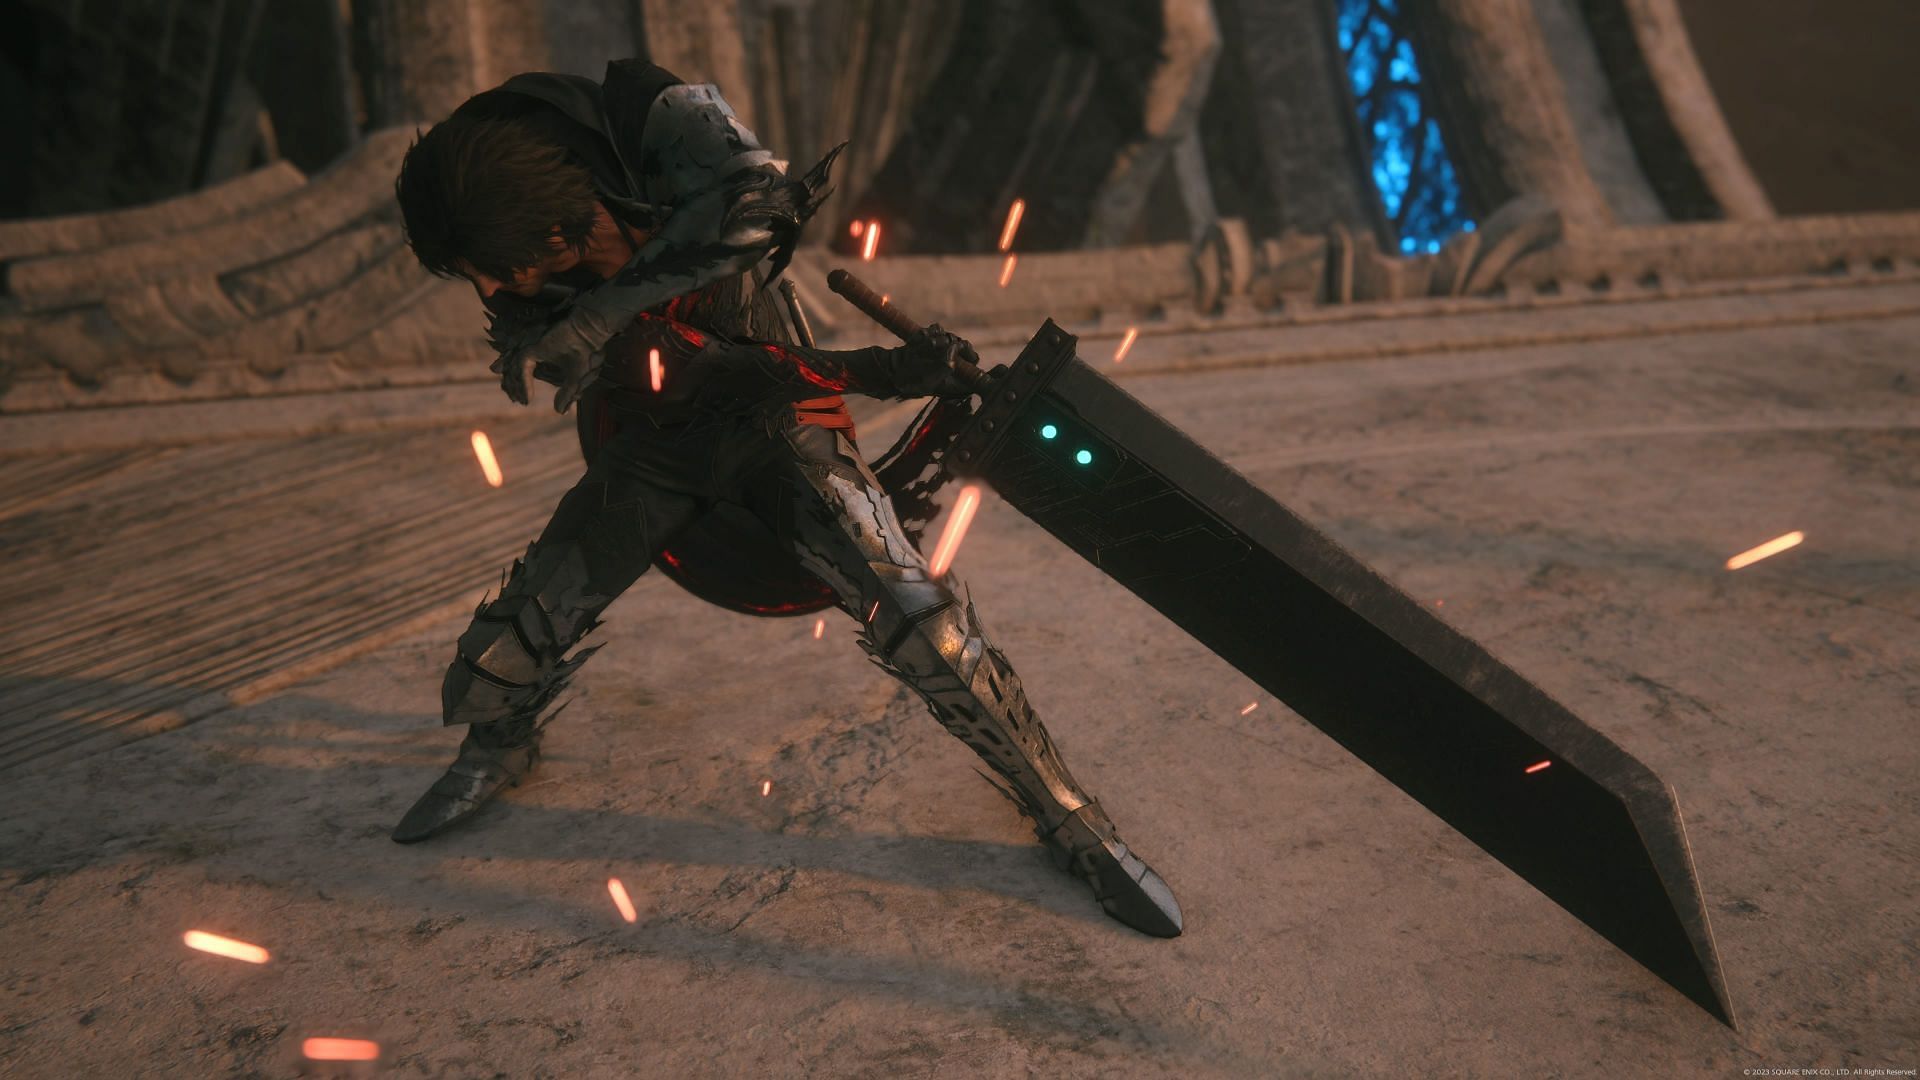 The Buster Sword is added to Final Fantasy XVI as part of Echoes of the Fallen DLC (Image via PlayStation, Sportskeeda)